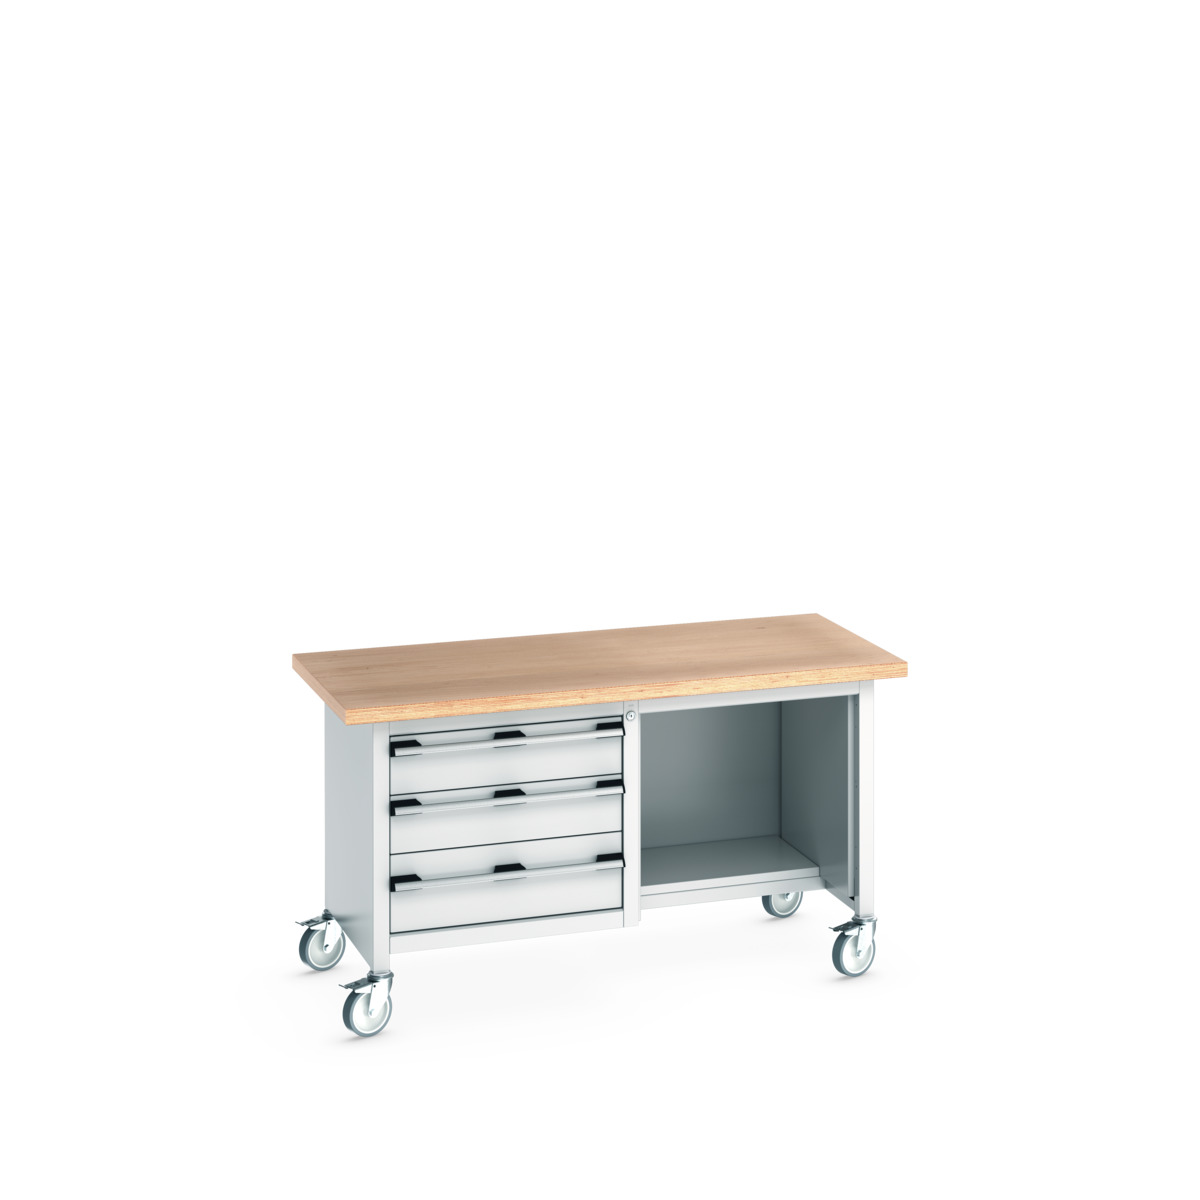 41002115.16V - cubio mobile storage bench (mpx)